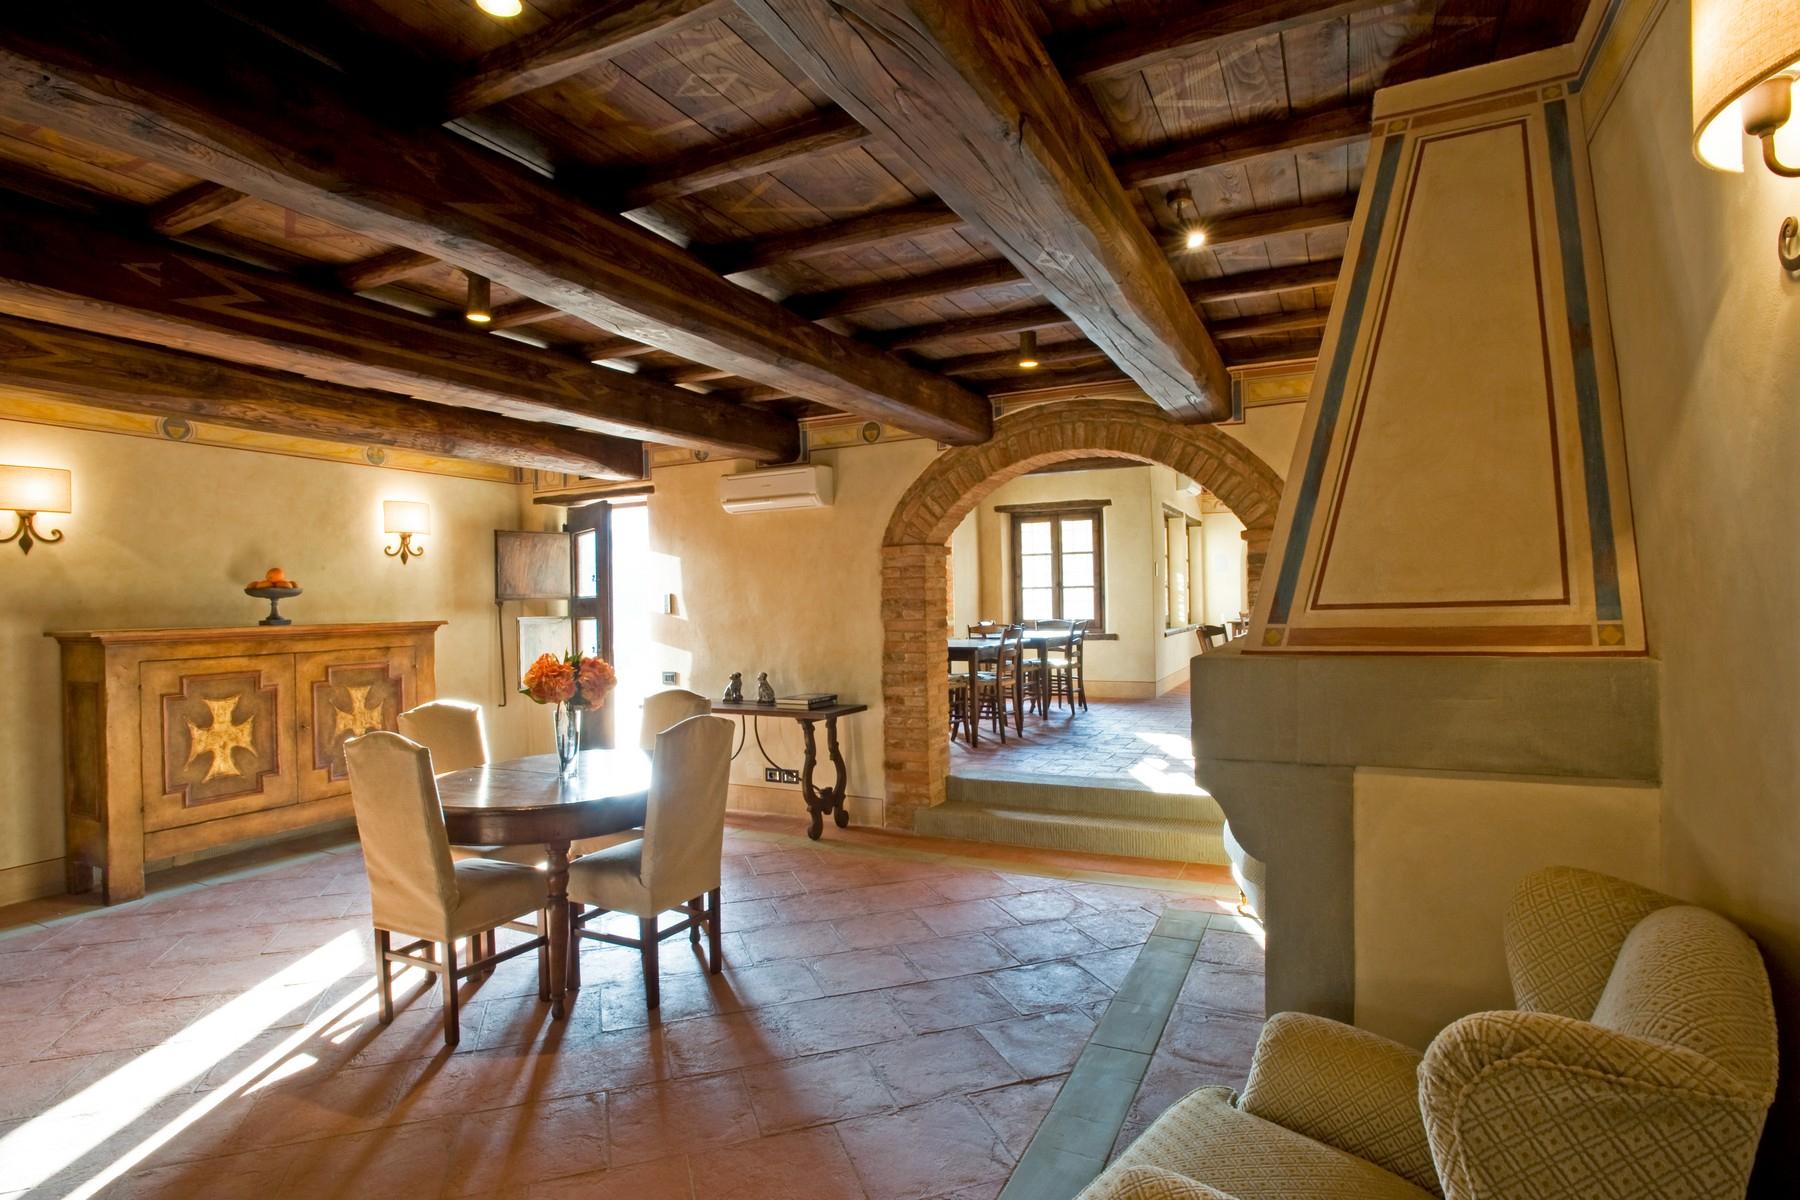 Farmhouse for sale in the Tuscan hills - 7